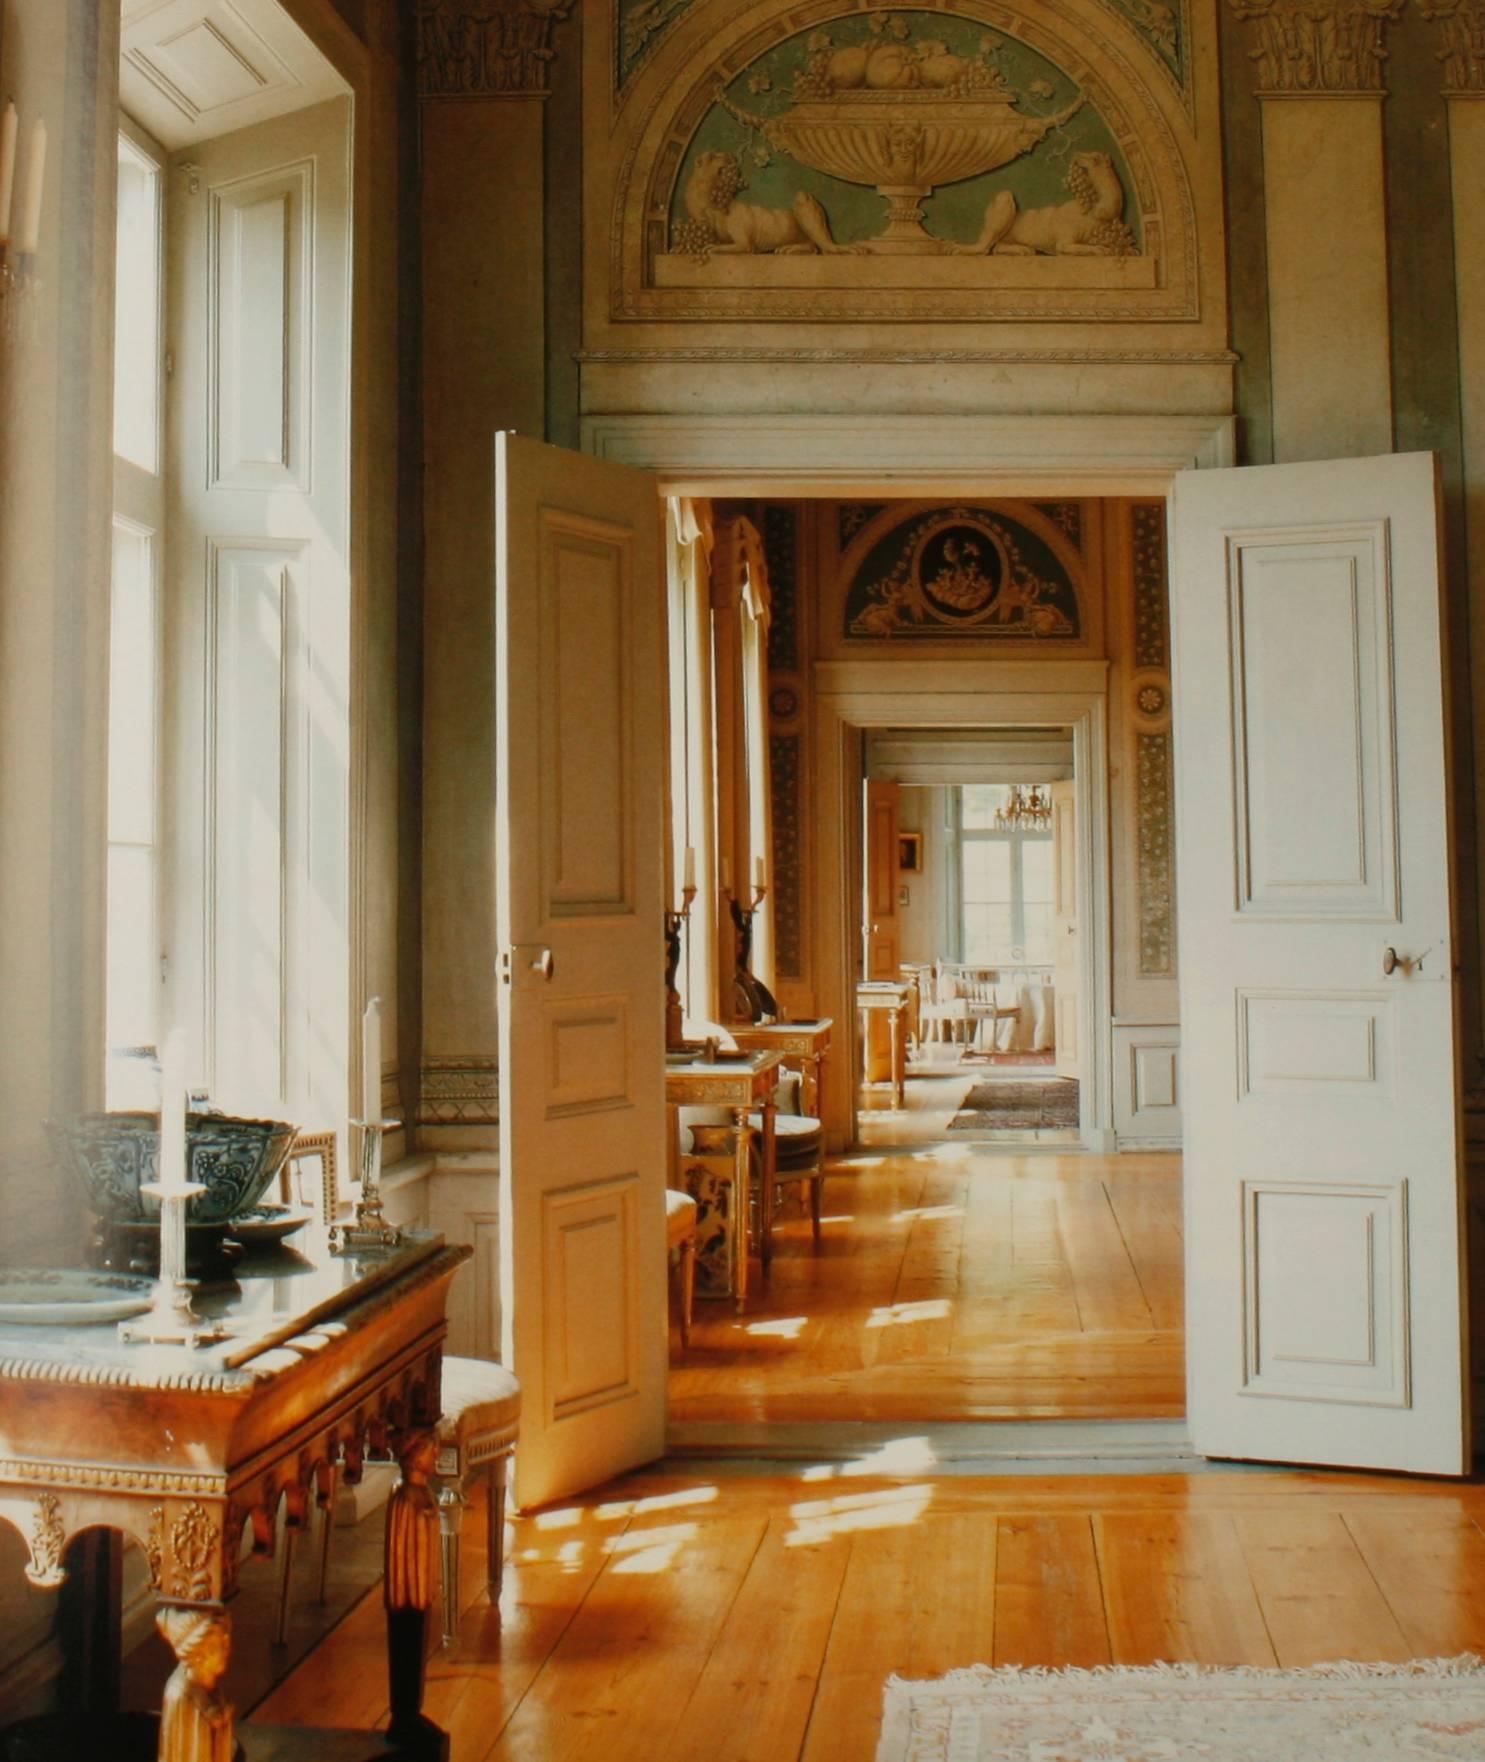 Late 20th Century Neoclassicism in the North Swedish Furniture and Interiors, 1770-1850